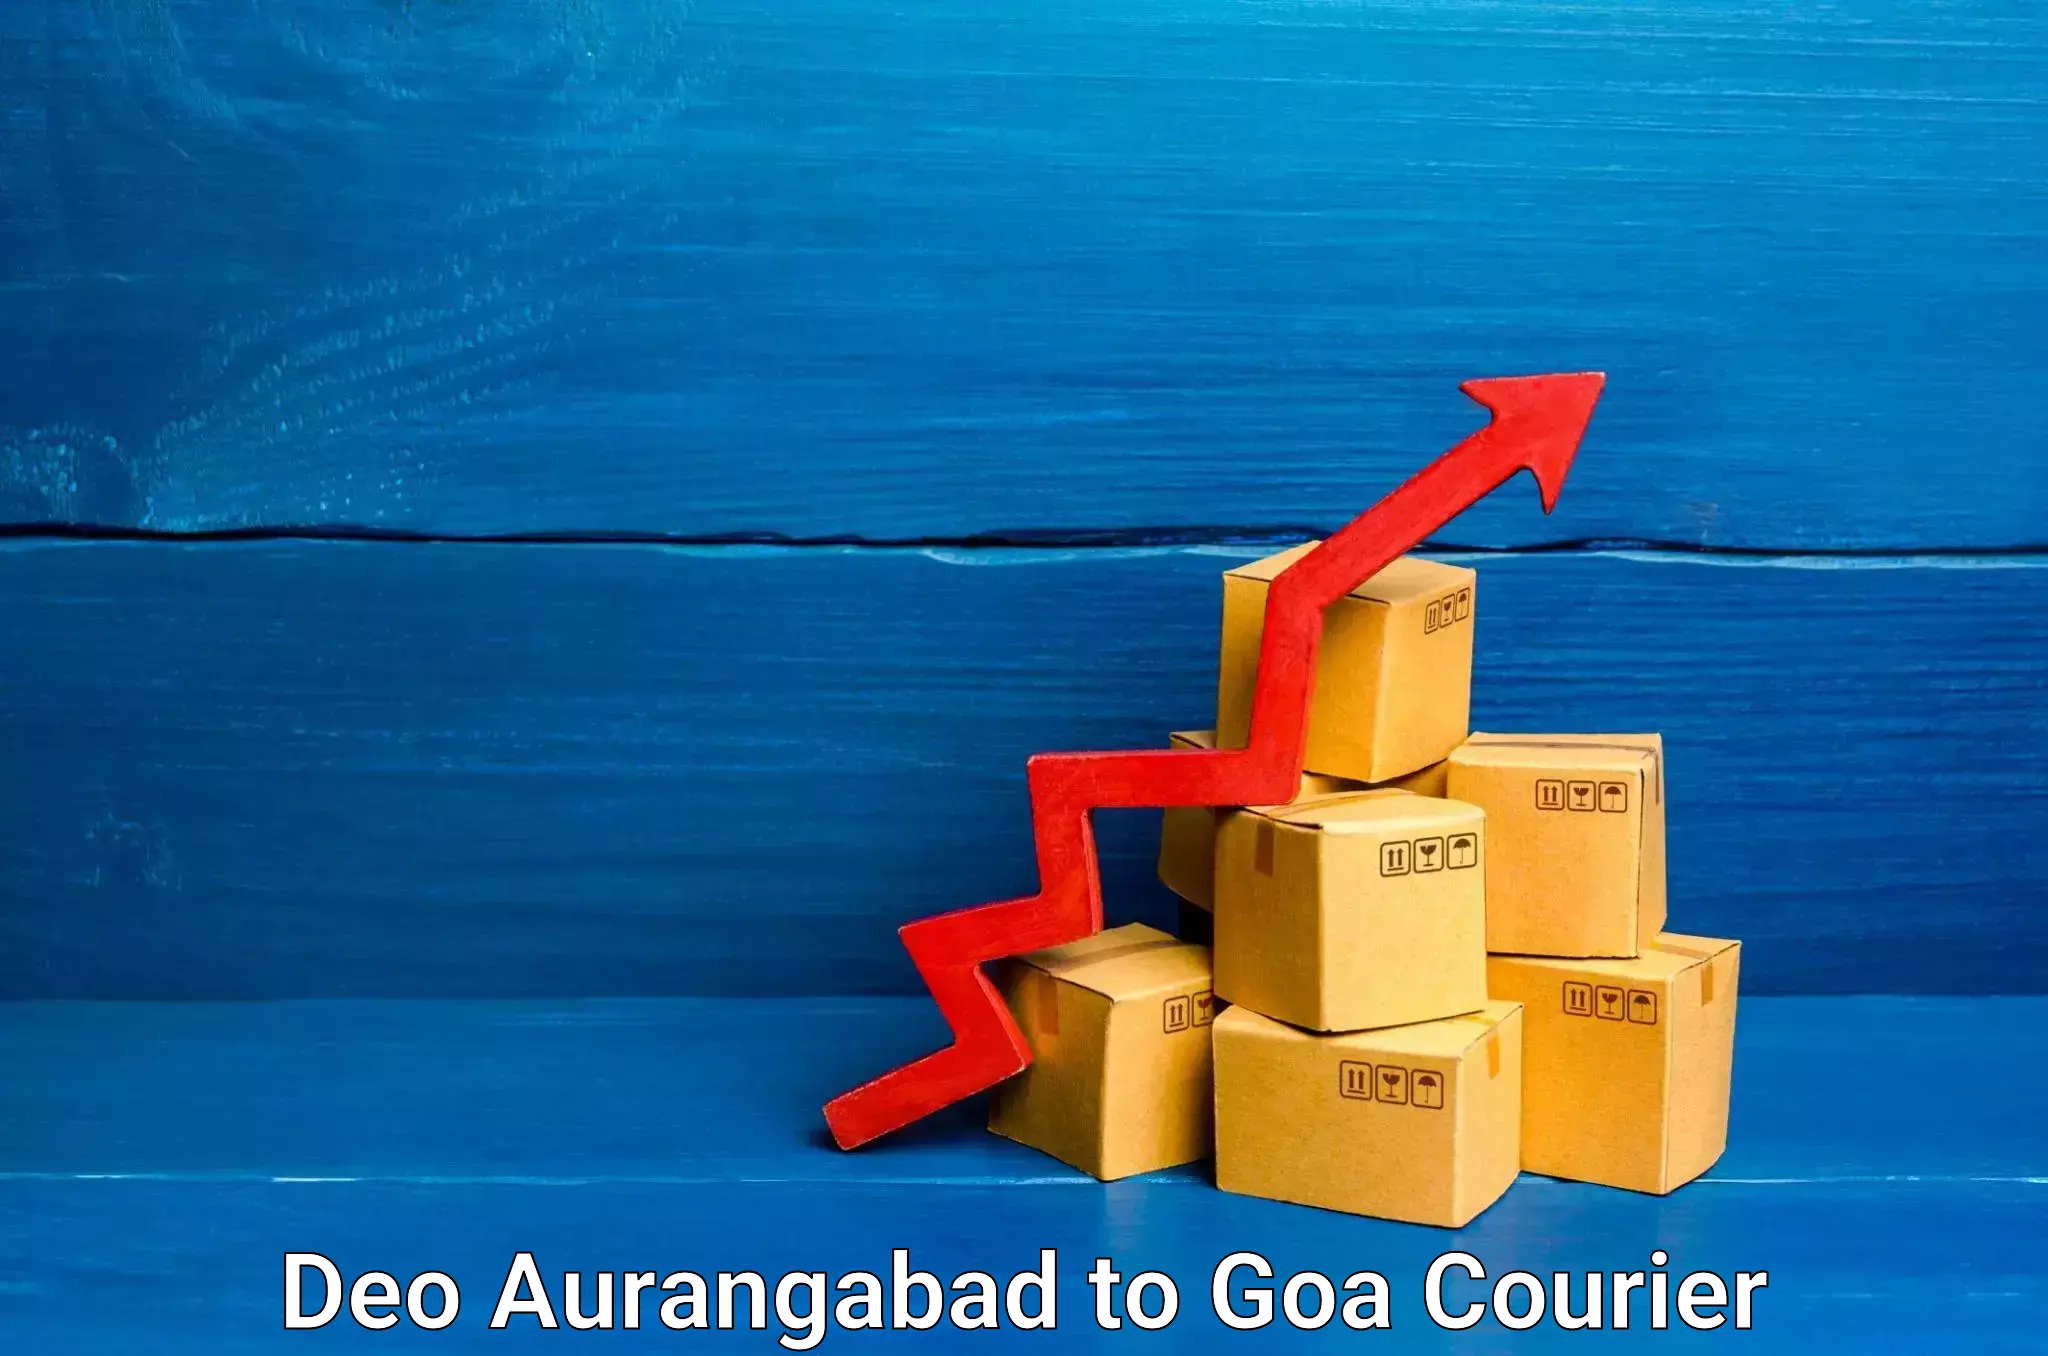 Furniture transport specialists Deo Aurangabad to South Goa